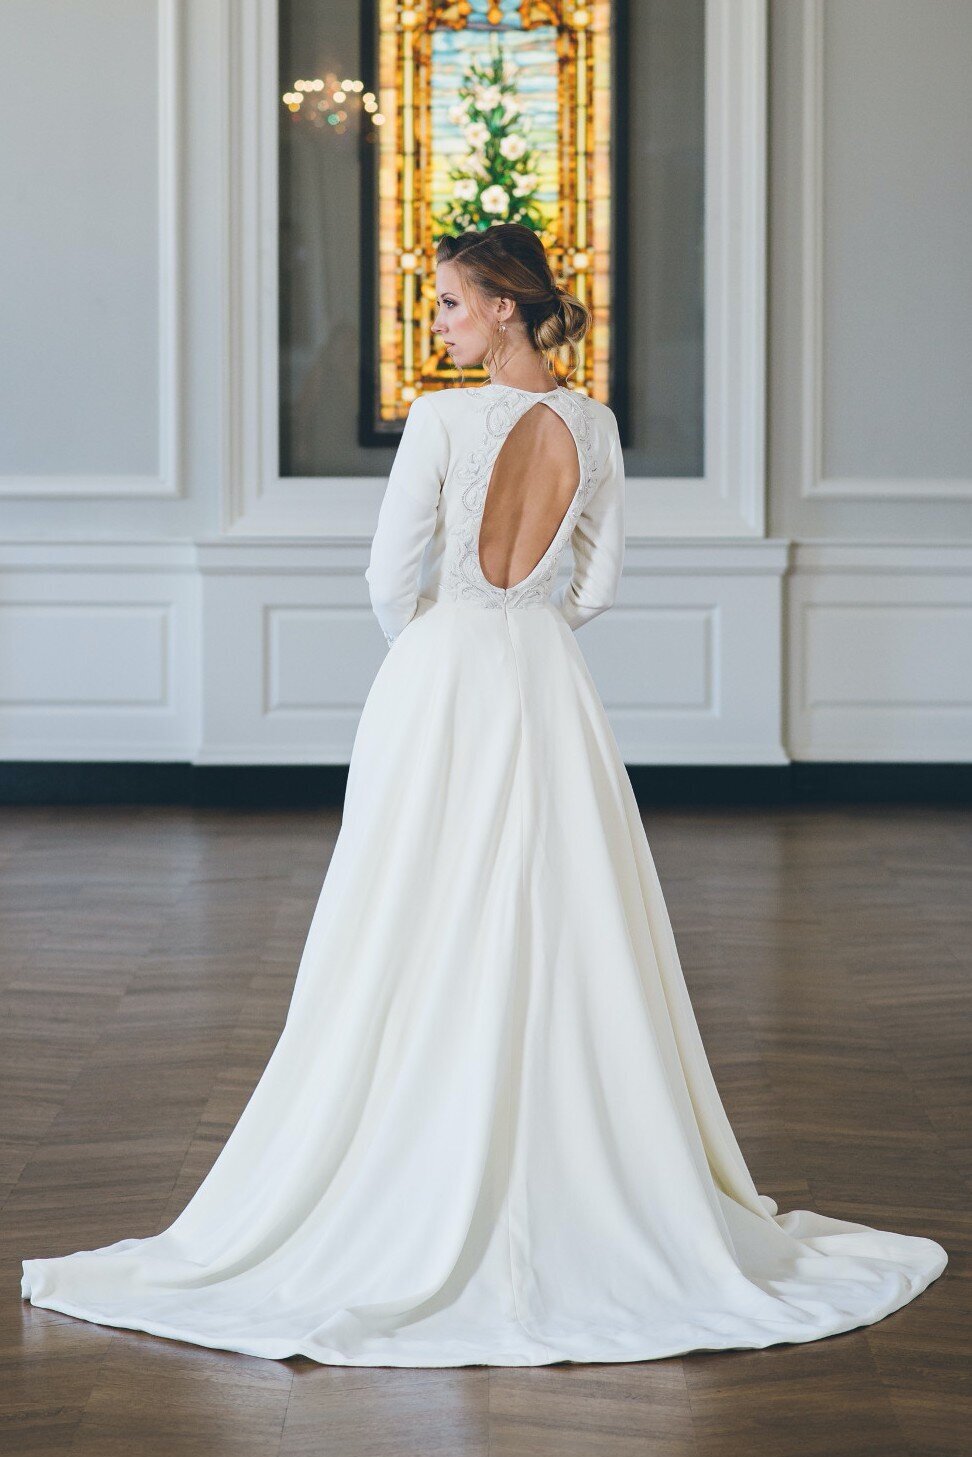 This long sleeve ballgown wedding dress reveals a keyhole back detail in the bodice.